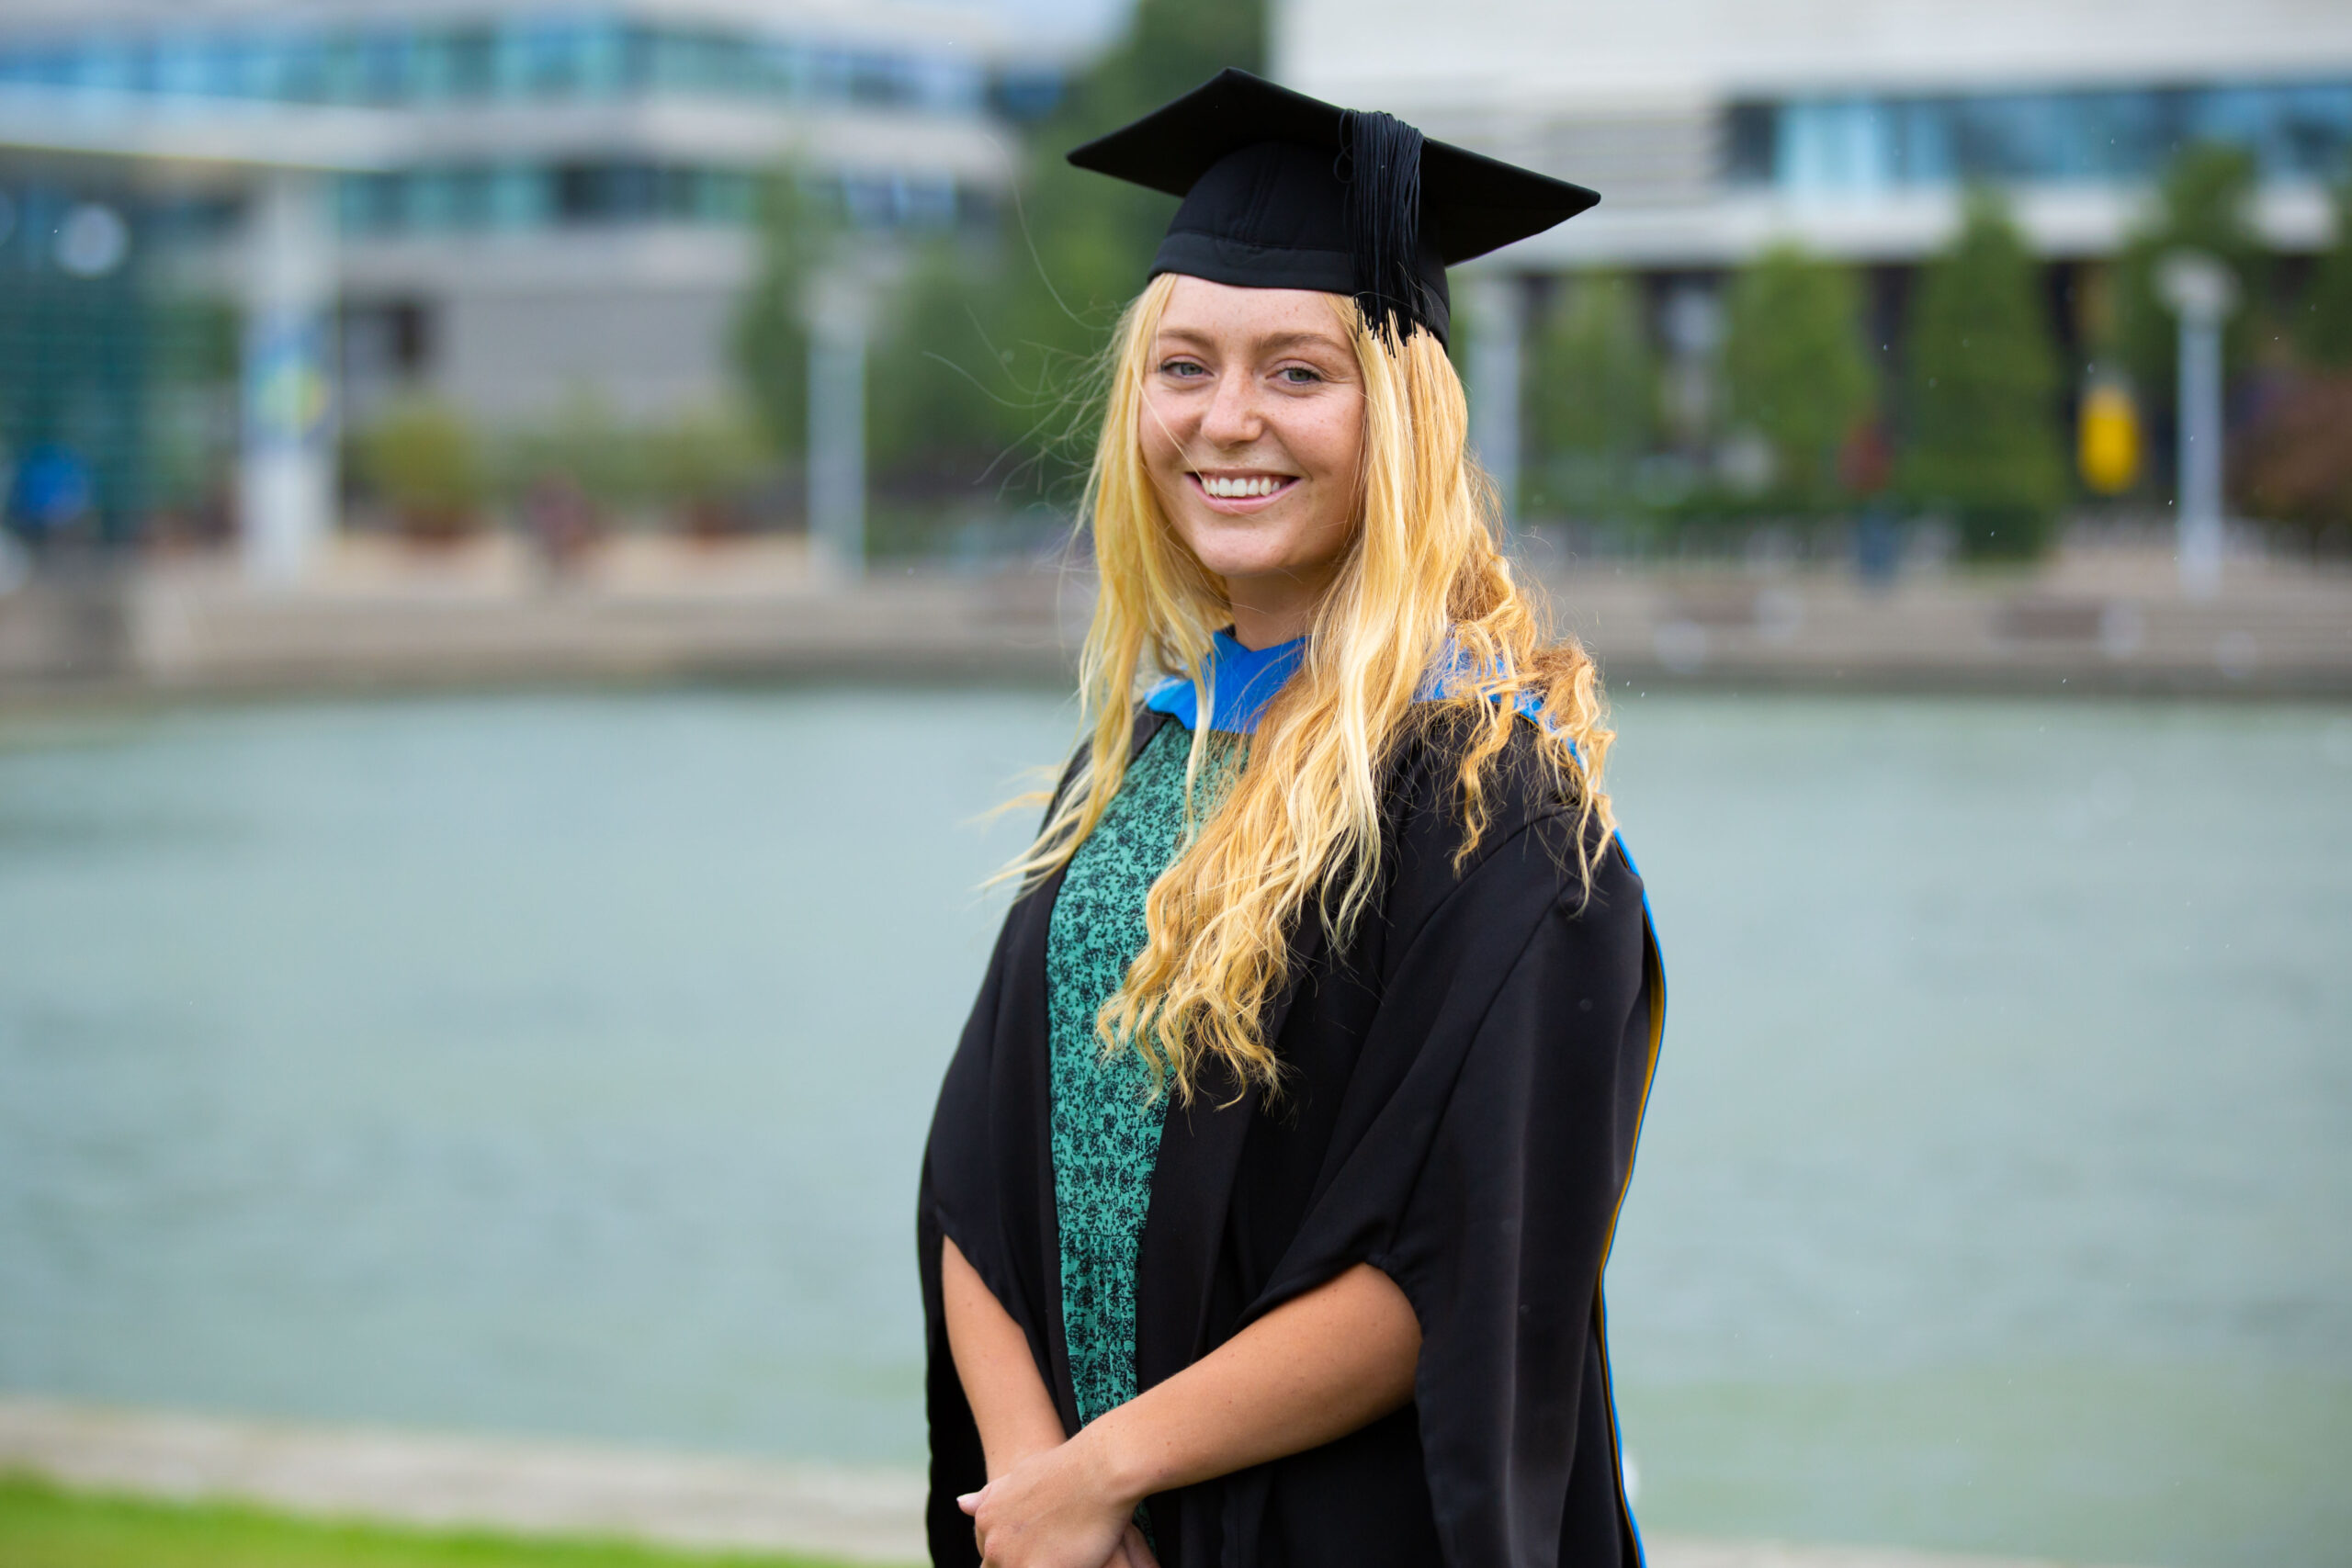 Lara poses in front of the UCD lake in her graduation cap and gown.